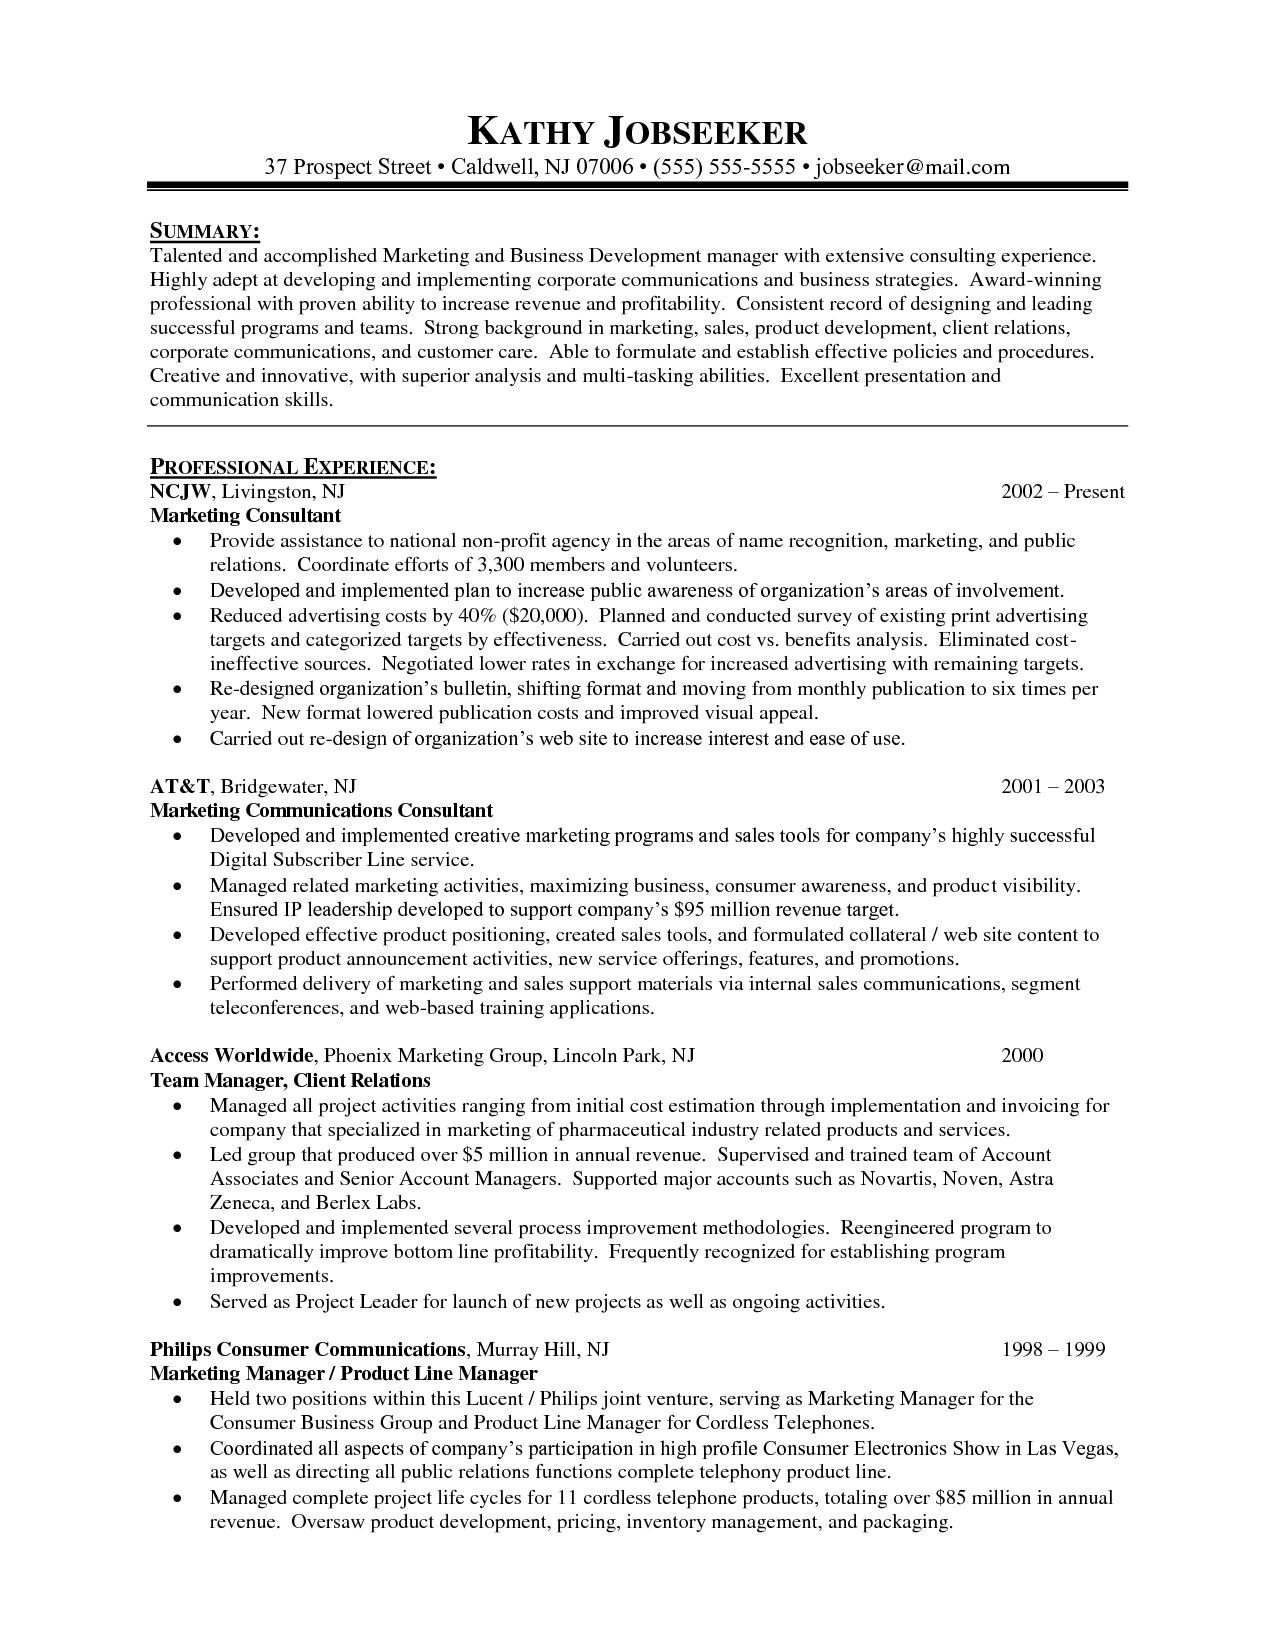 Pharmacy assistant Resume Sample No Experience Cover Letter Pharmacy assistant No Experience Resume Layout